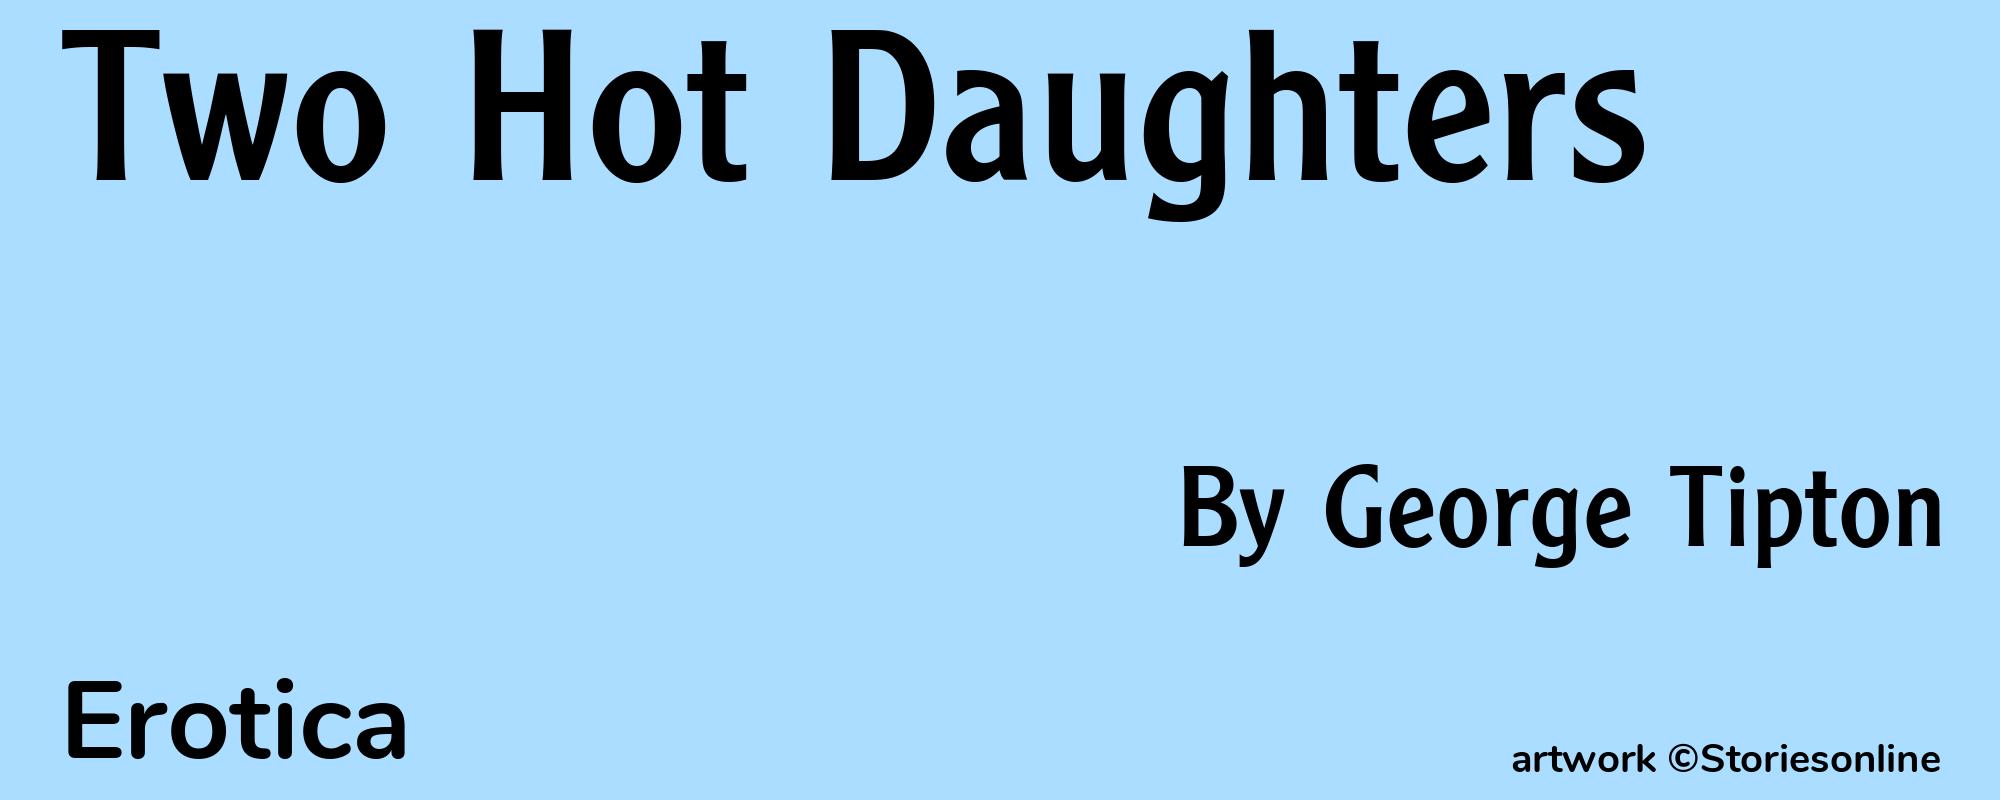 Two Hot Daughters - Cover